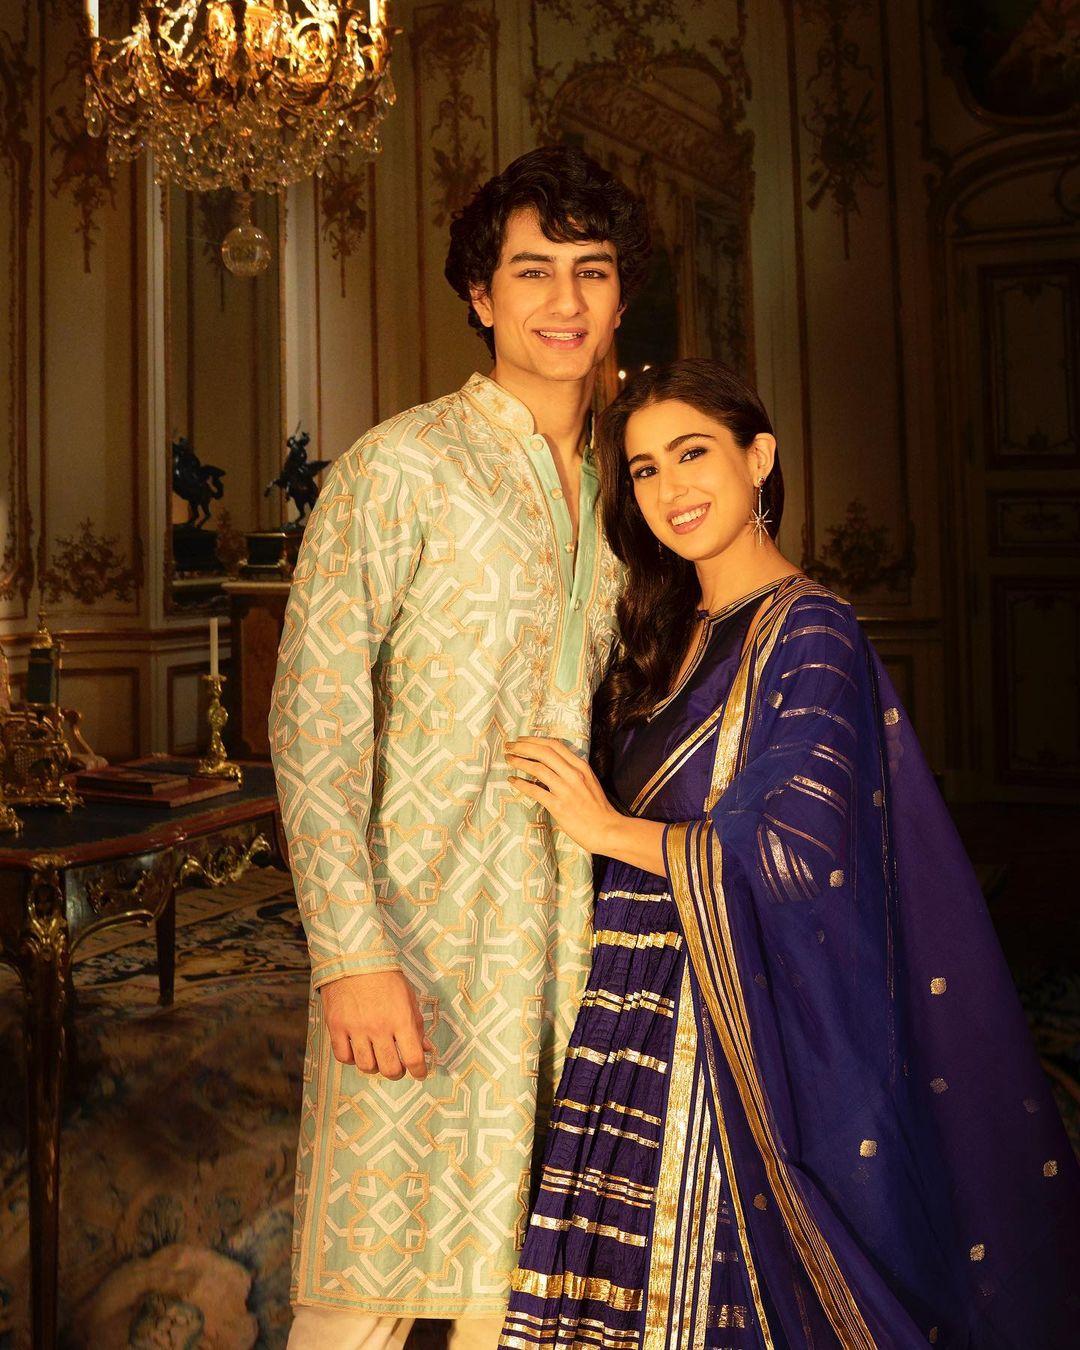 In this picture, Sara Ali Khan and Ibrahim posed together in coordinated traditional outfits, showcasing sibling goals